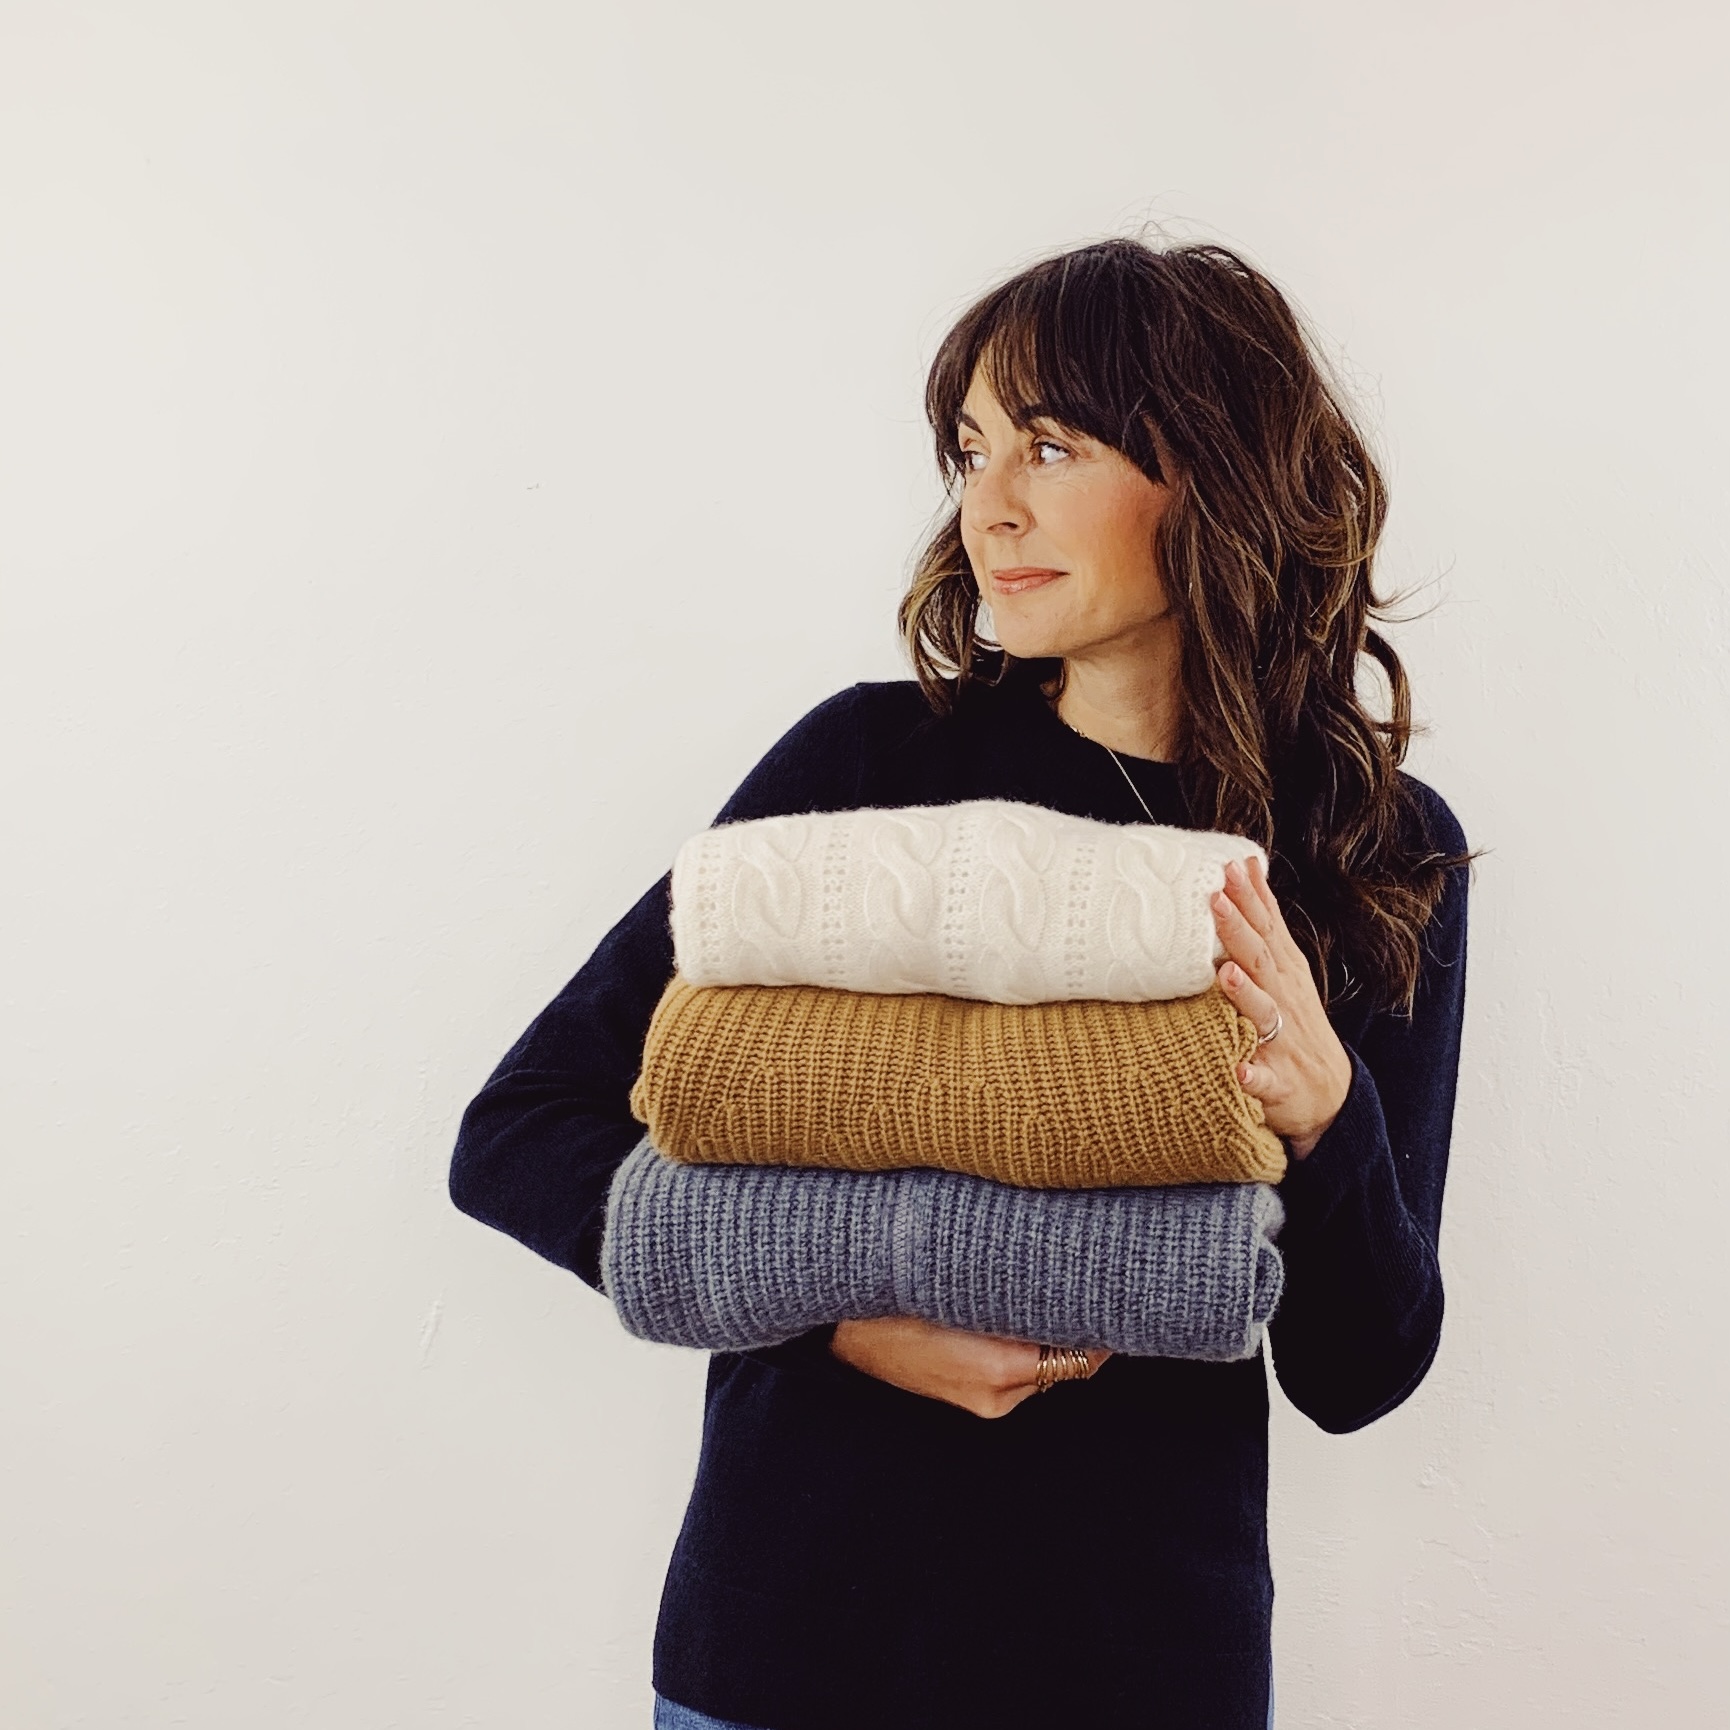 SWEATER SITUATION | STAGING SOLUTIONS TO HELP YOU SHOP YOUR CLOSET